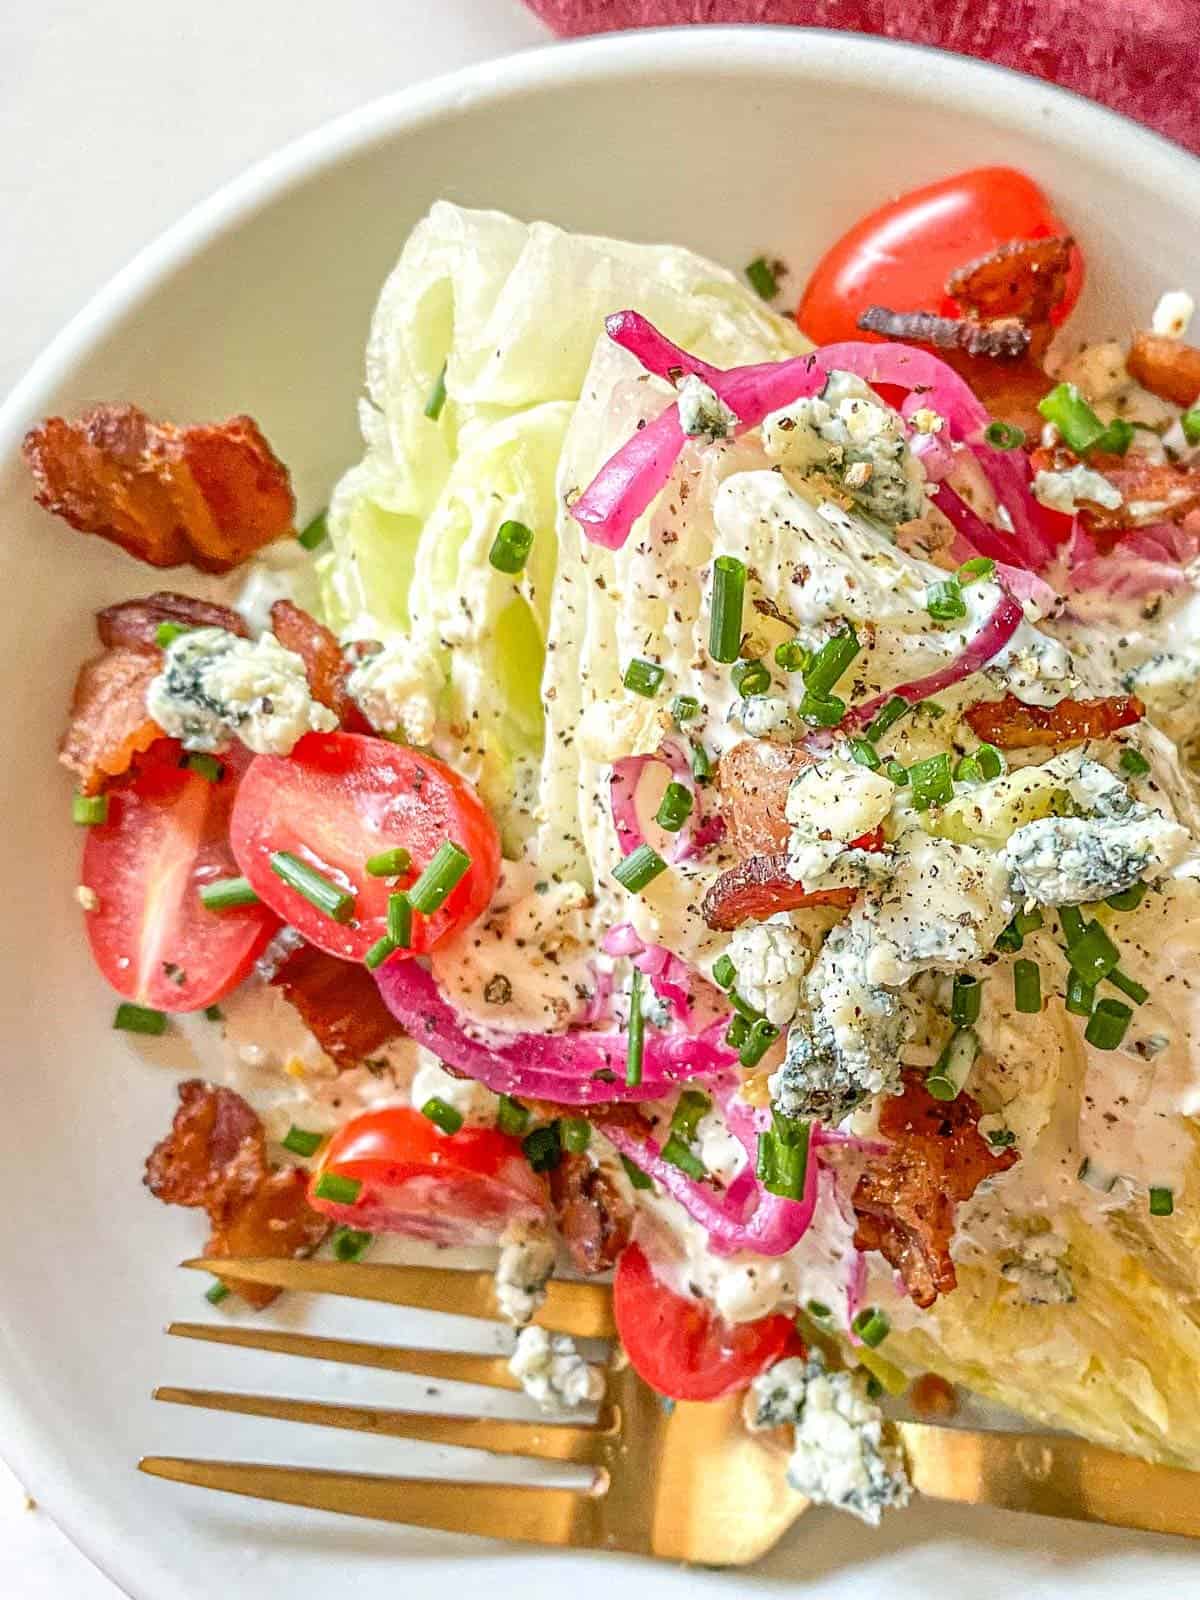 classic blue cheese wedge salad with all the toppings and homemade blue cheese dressing